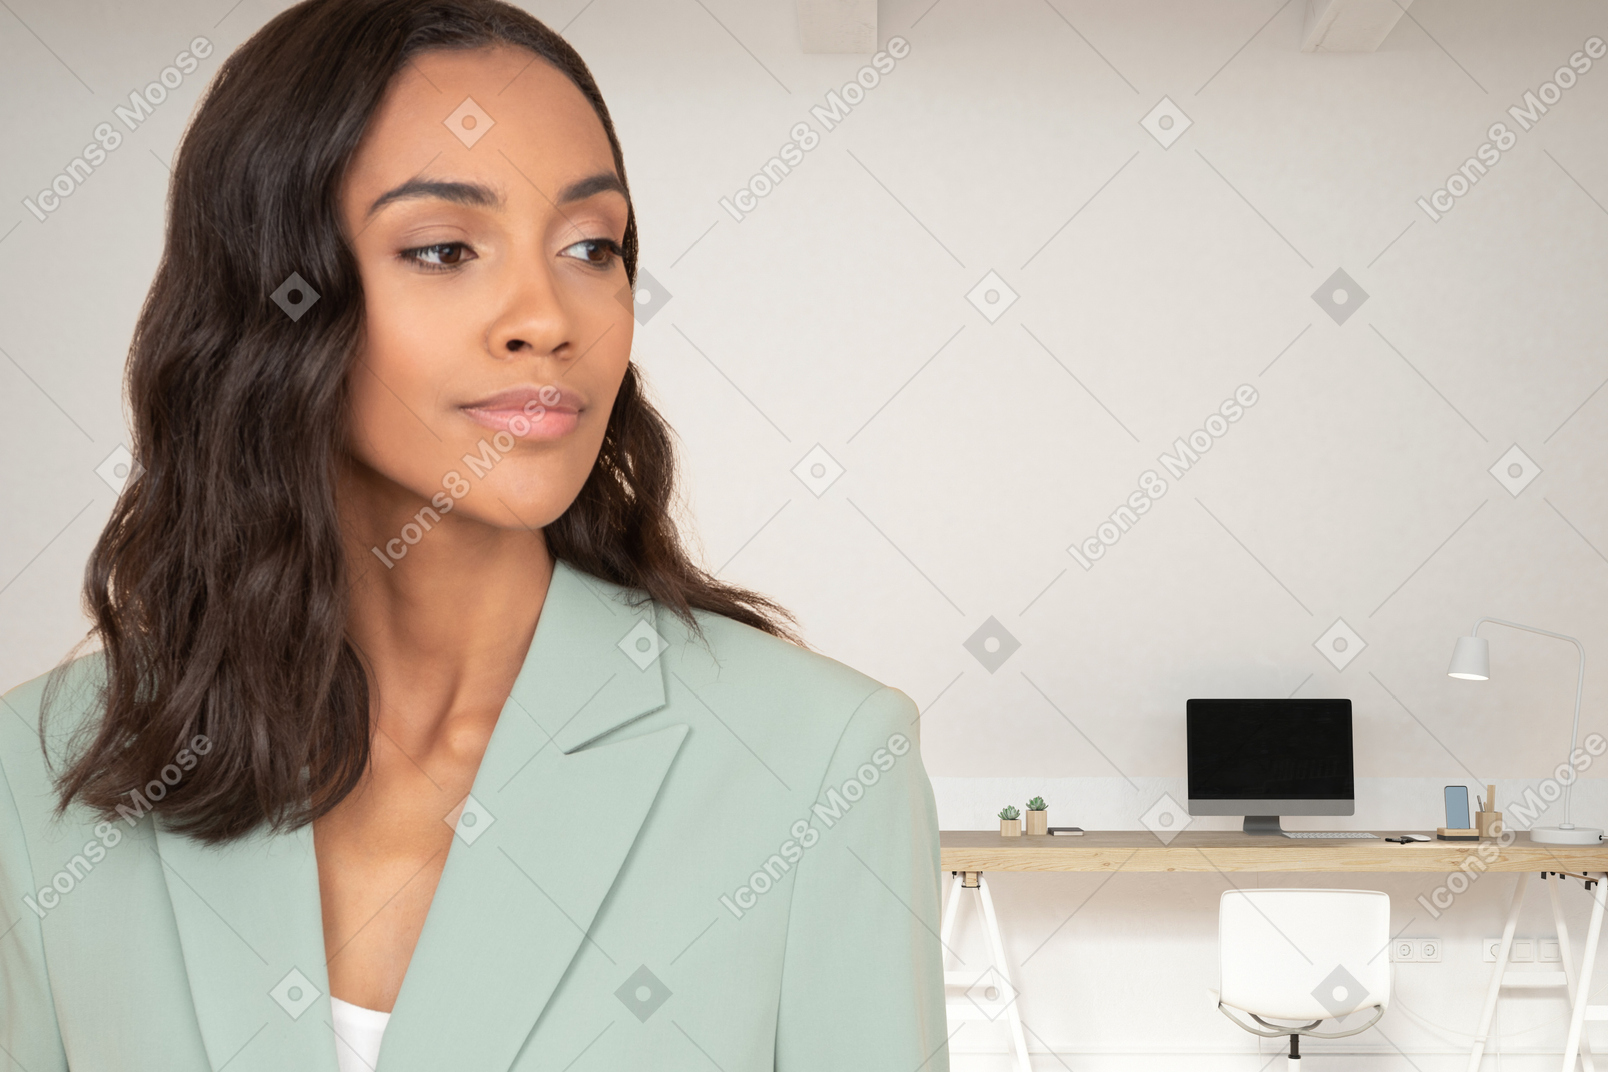 A woman in a green suit standing in front of a desk